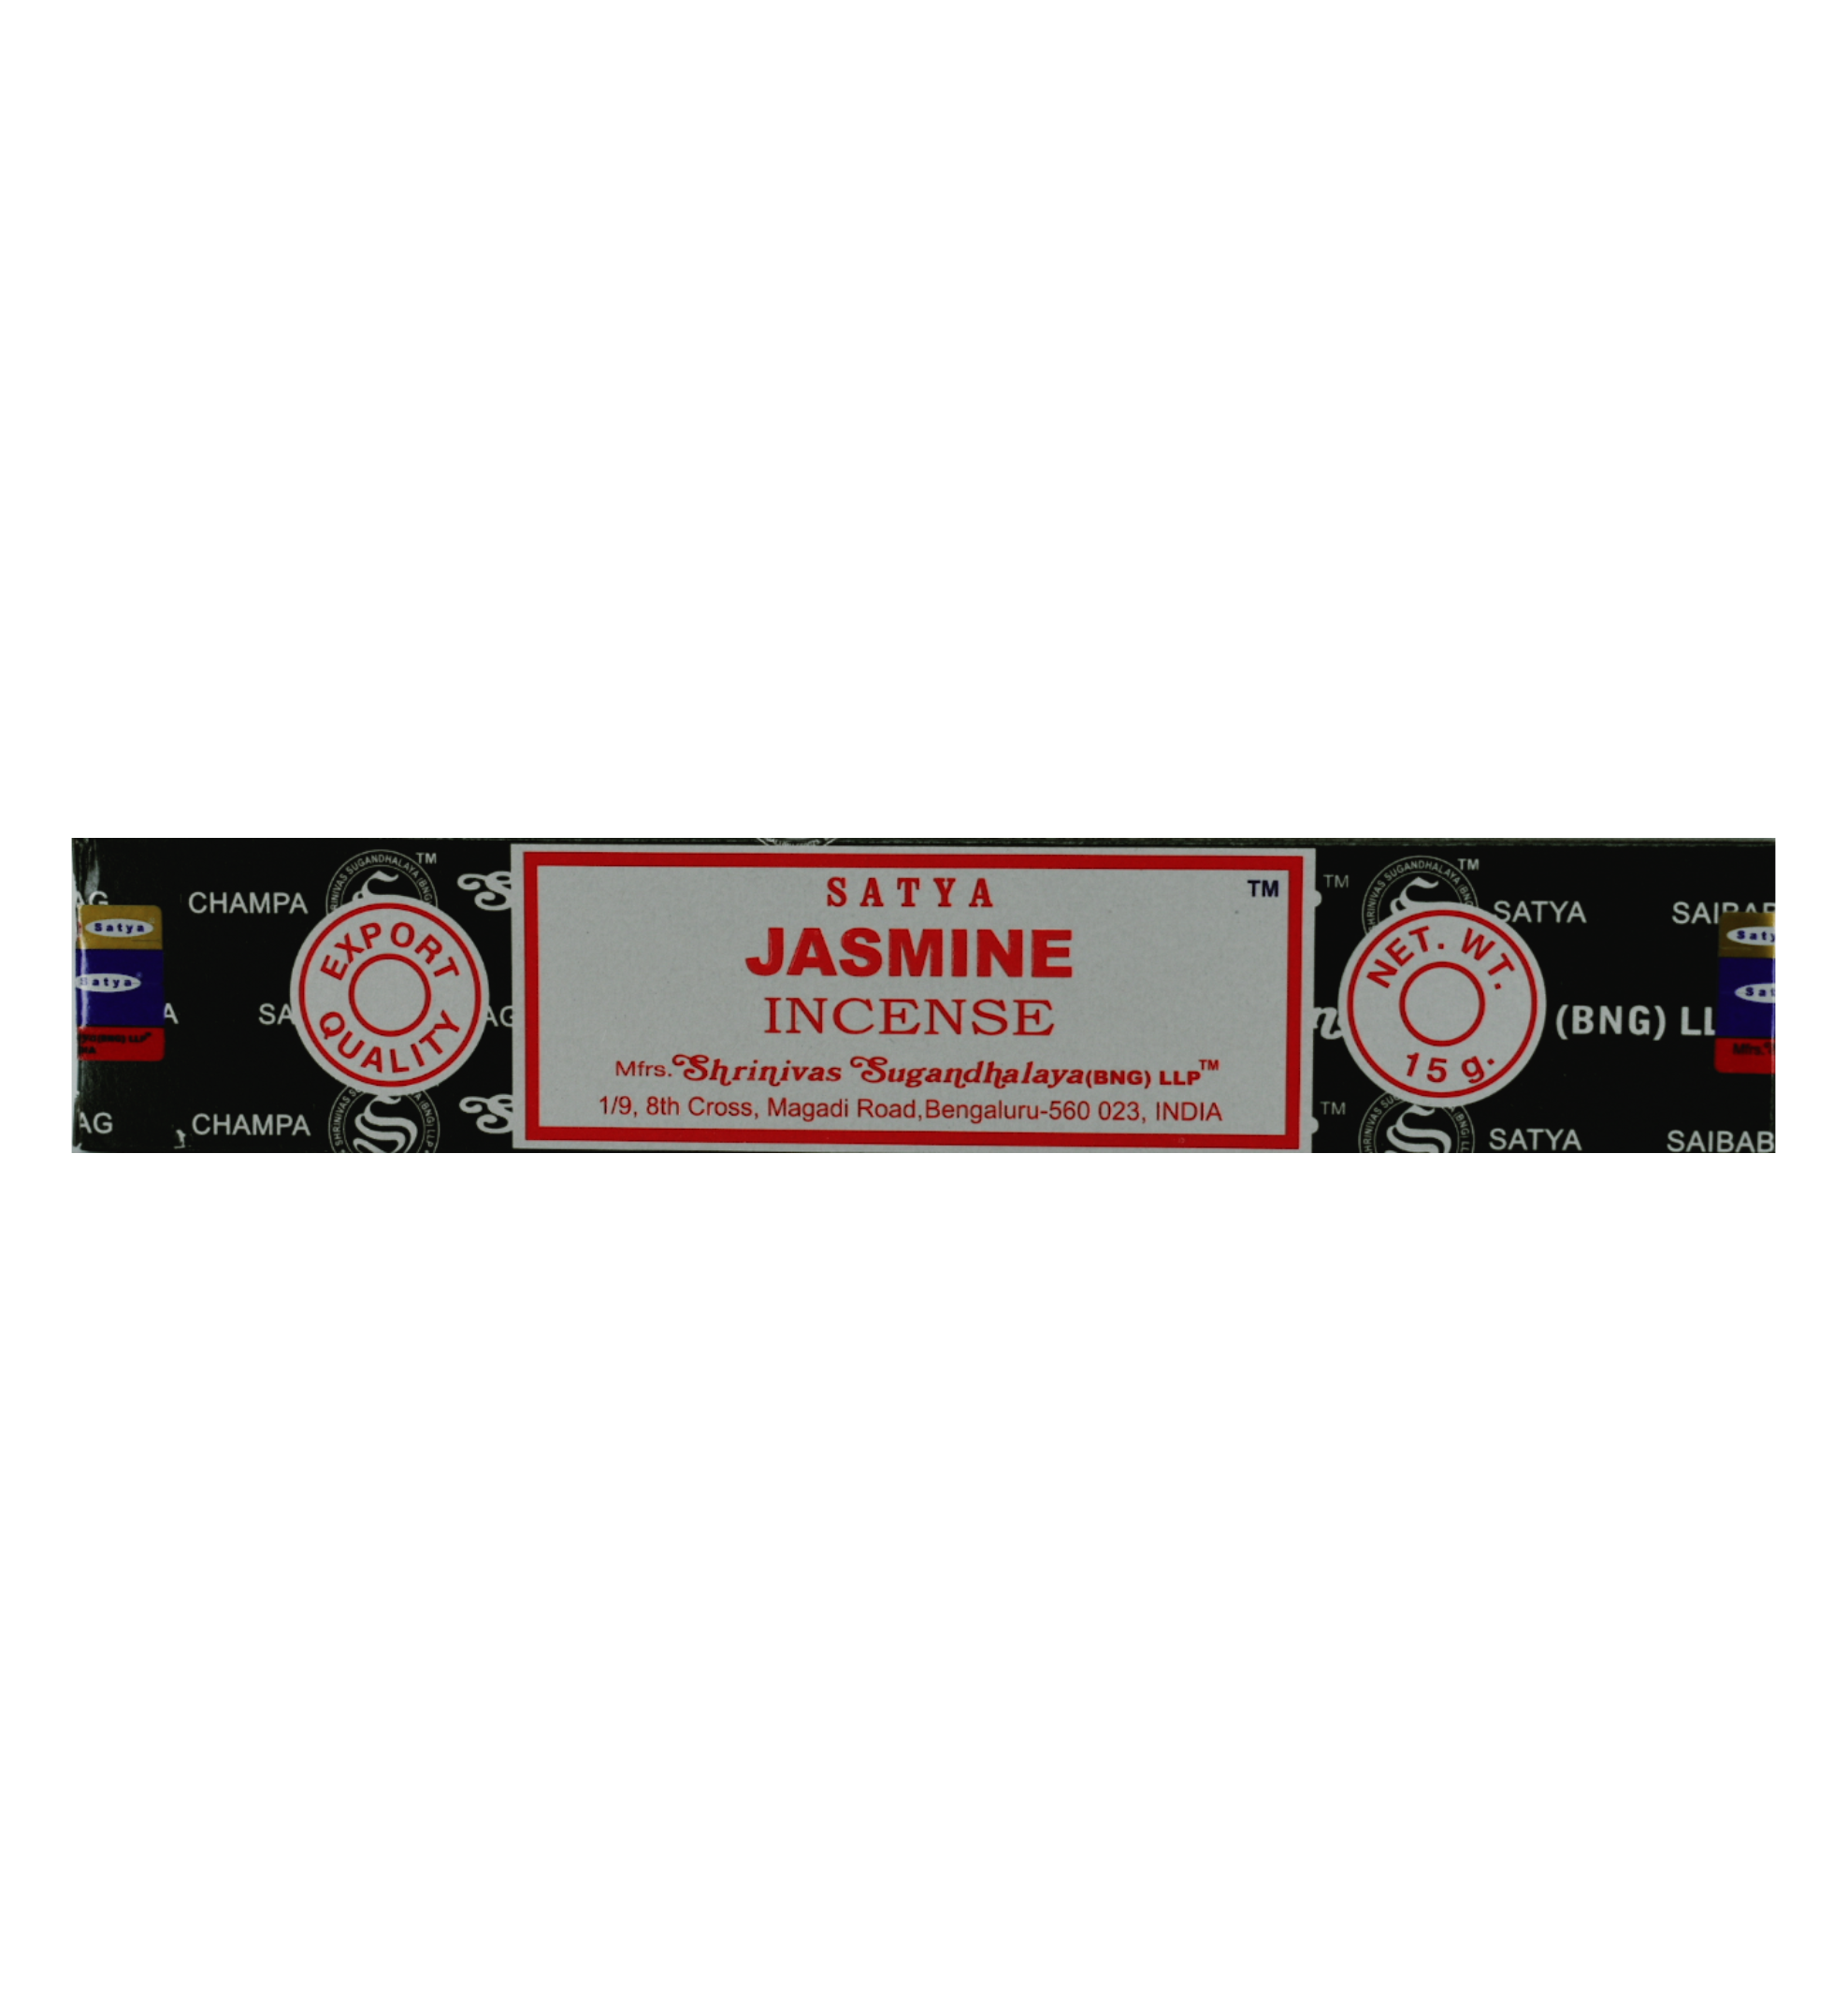 asmine Incense Sticks. Box is dark green with white lines that have company words as a design. The center of the box has a white rectangle with a red frame within the border. In the rectangle the top line has the company name. The next rows have the title Jasmine Incense. At the bottom of the rectangle is the manufacturer&